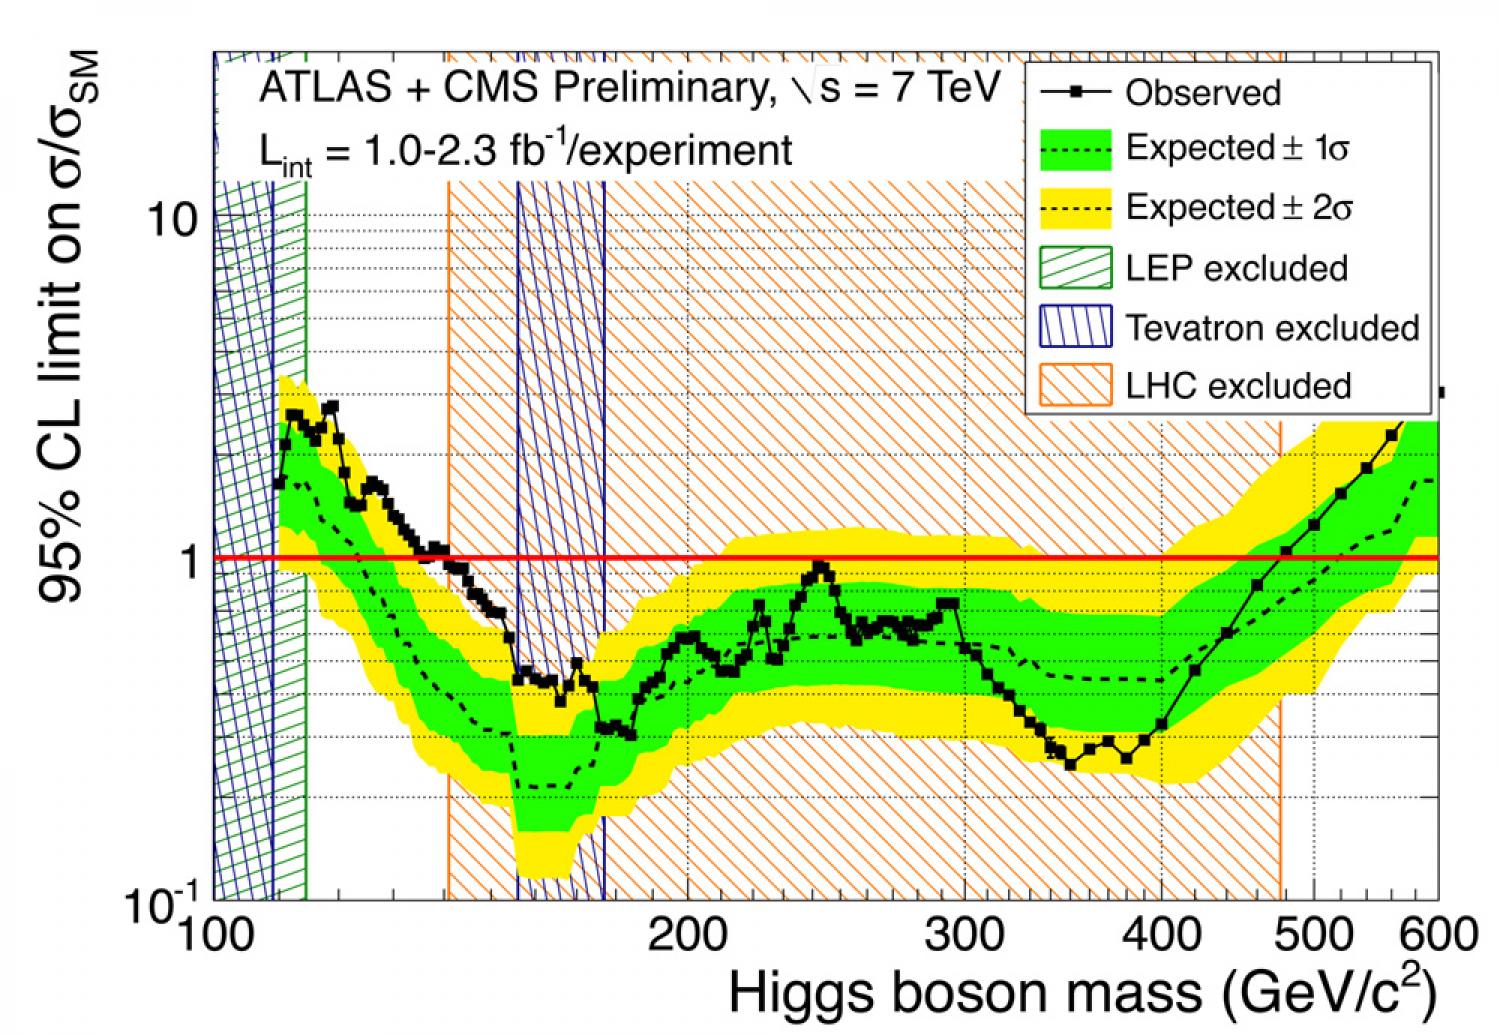 Simulation results of (a) CHB and (b) MMC. The sub-plots show: i